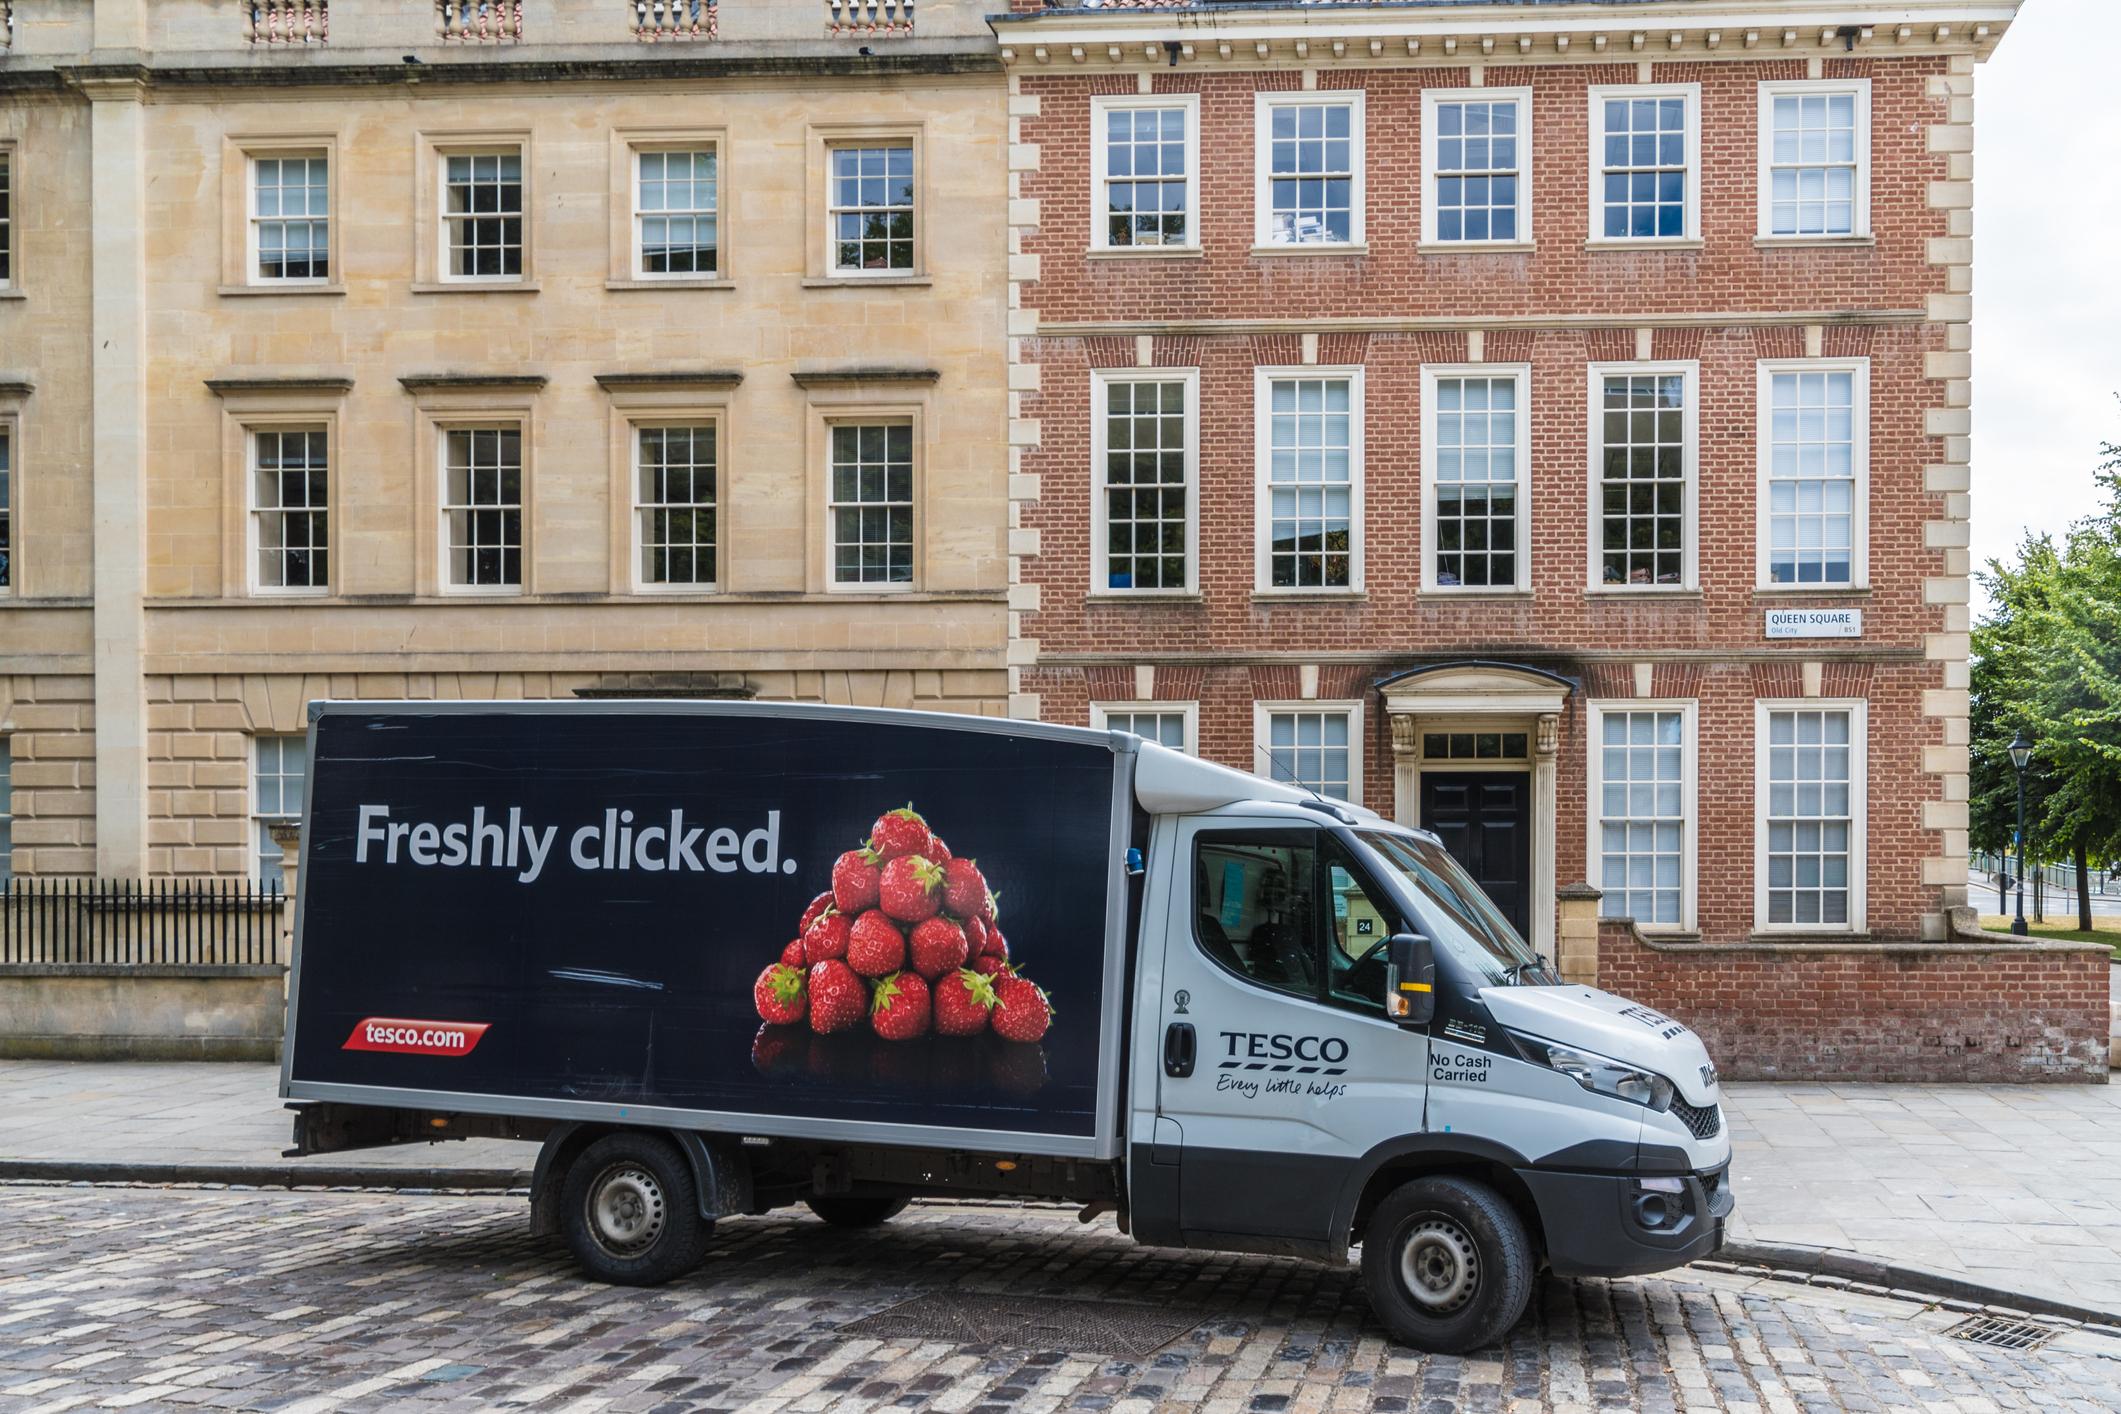 Tesco plans to hire more delivery drivers and pickers to support its growing online business